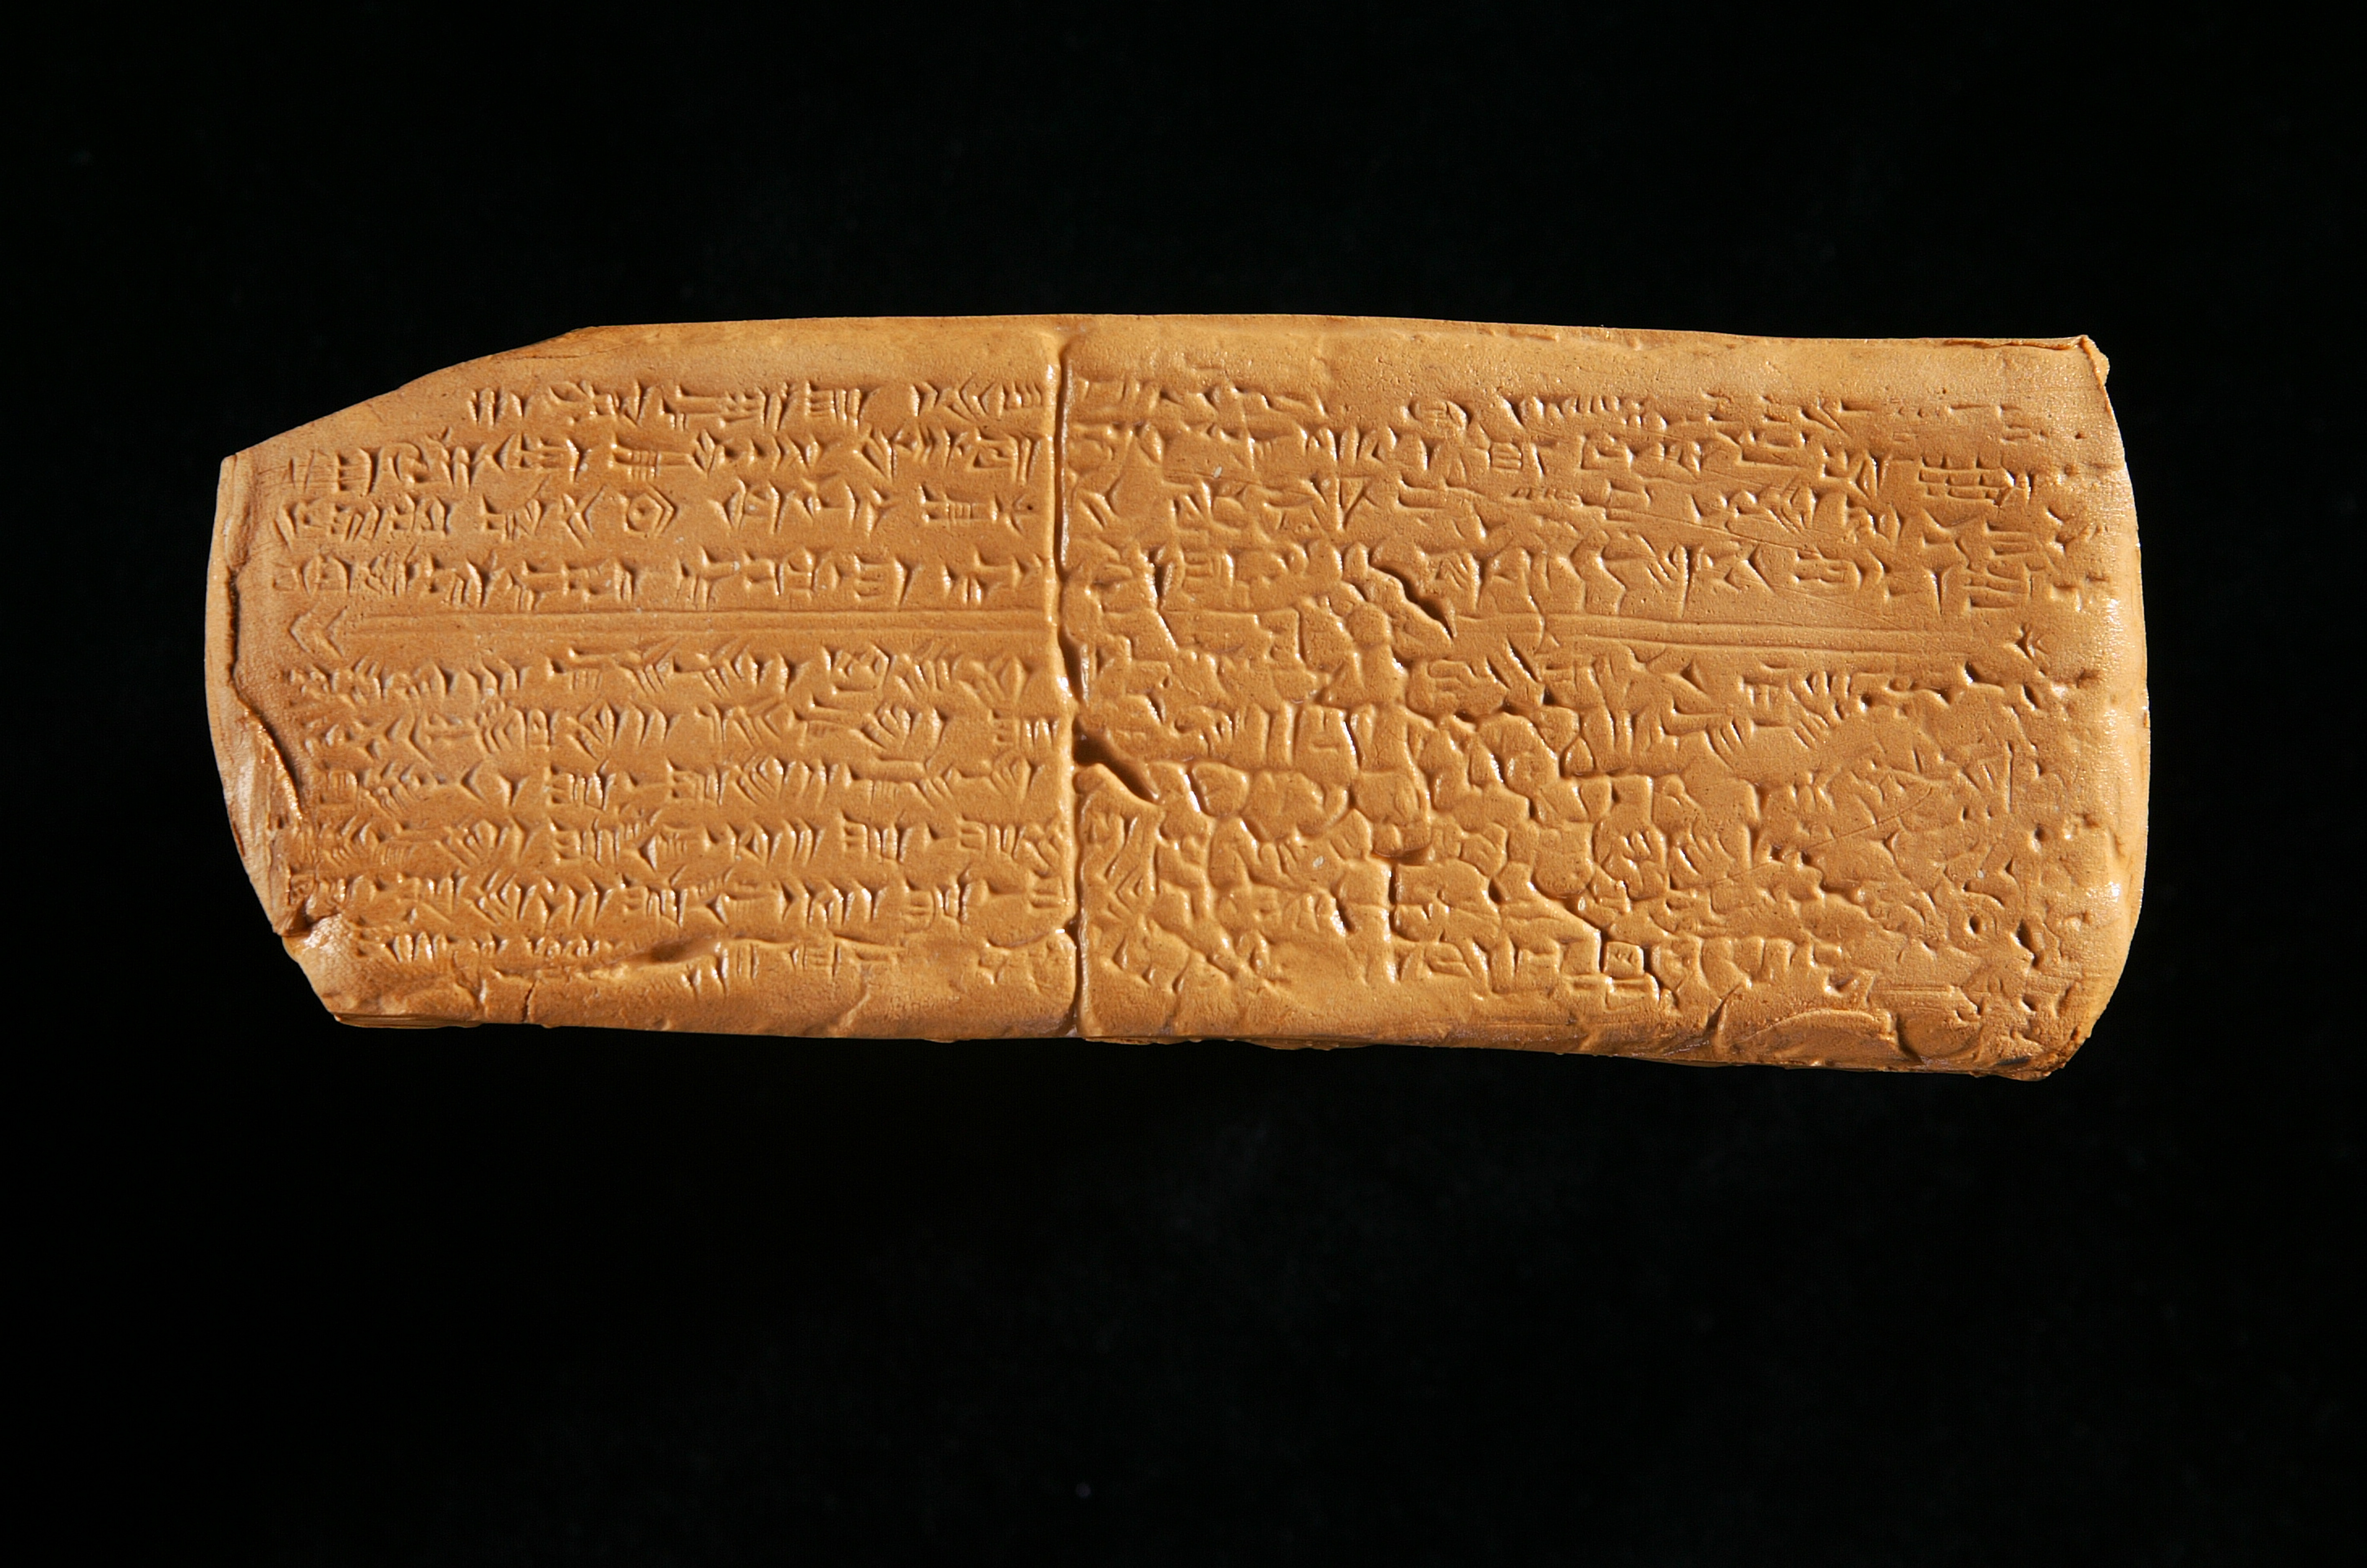 Clay tablet from Ugarit